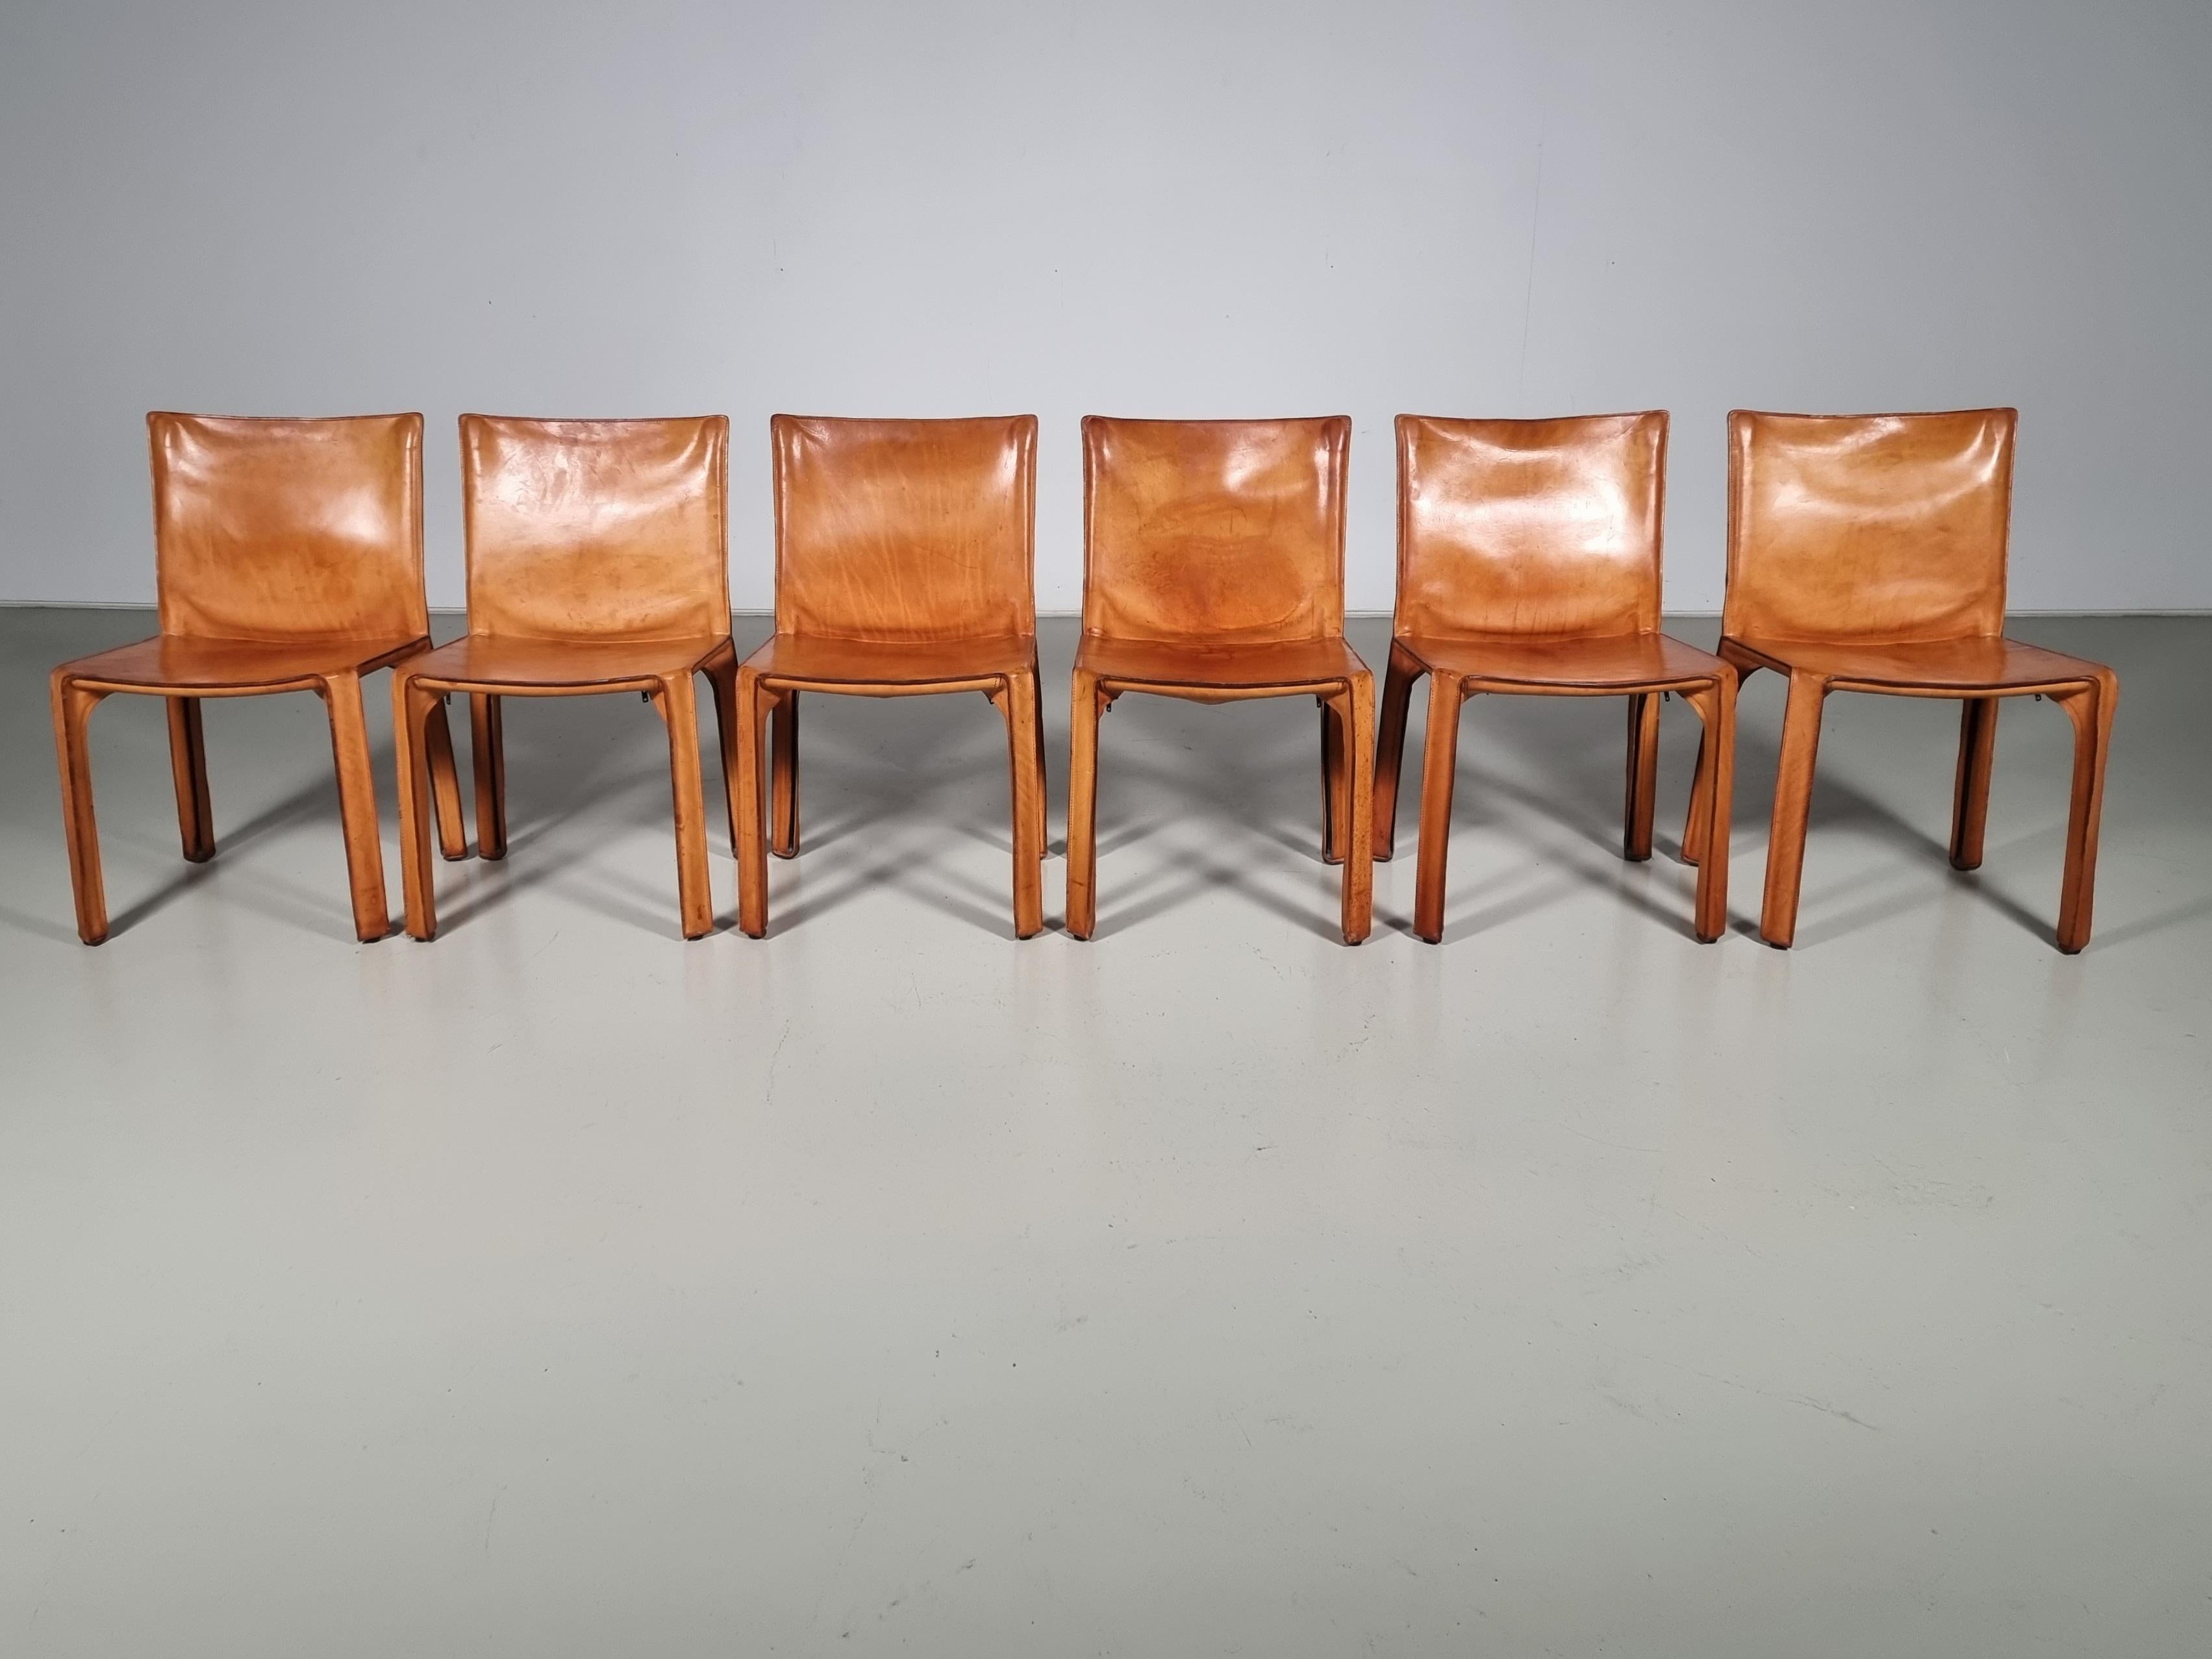 Set of 6 early edition CAB-412 dining room chairs in cognac saddle leather. Designed by Mario Bellini and manufactured by Cassina in the 1970s in Italy. The leather cover is stretched over a minimal tubular steel frame. The only additional